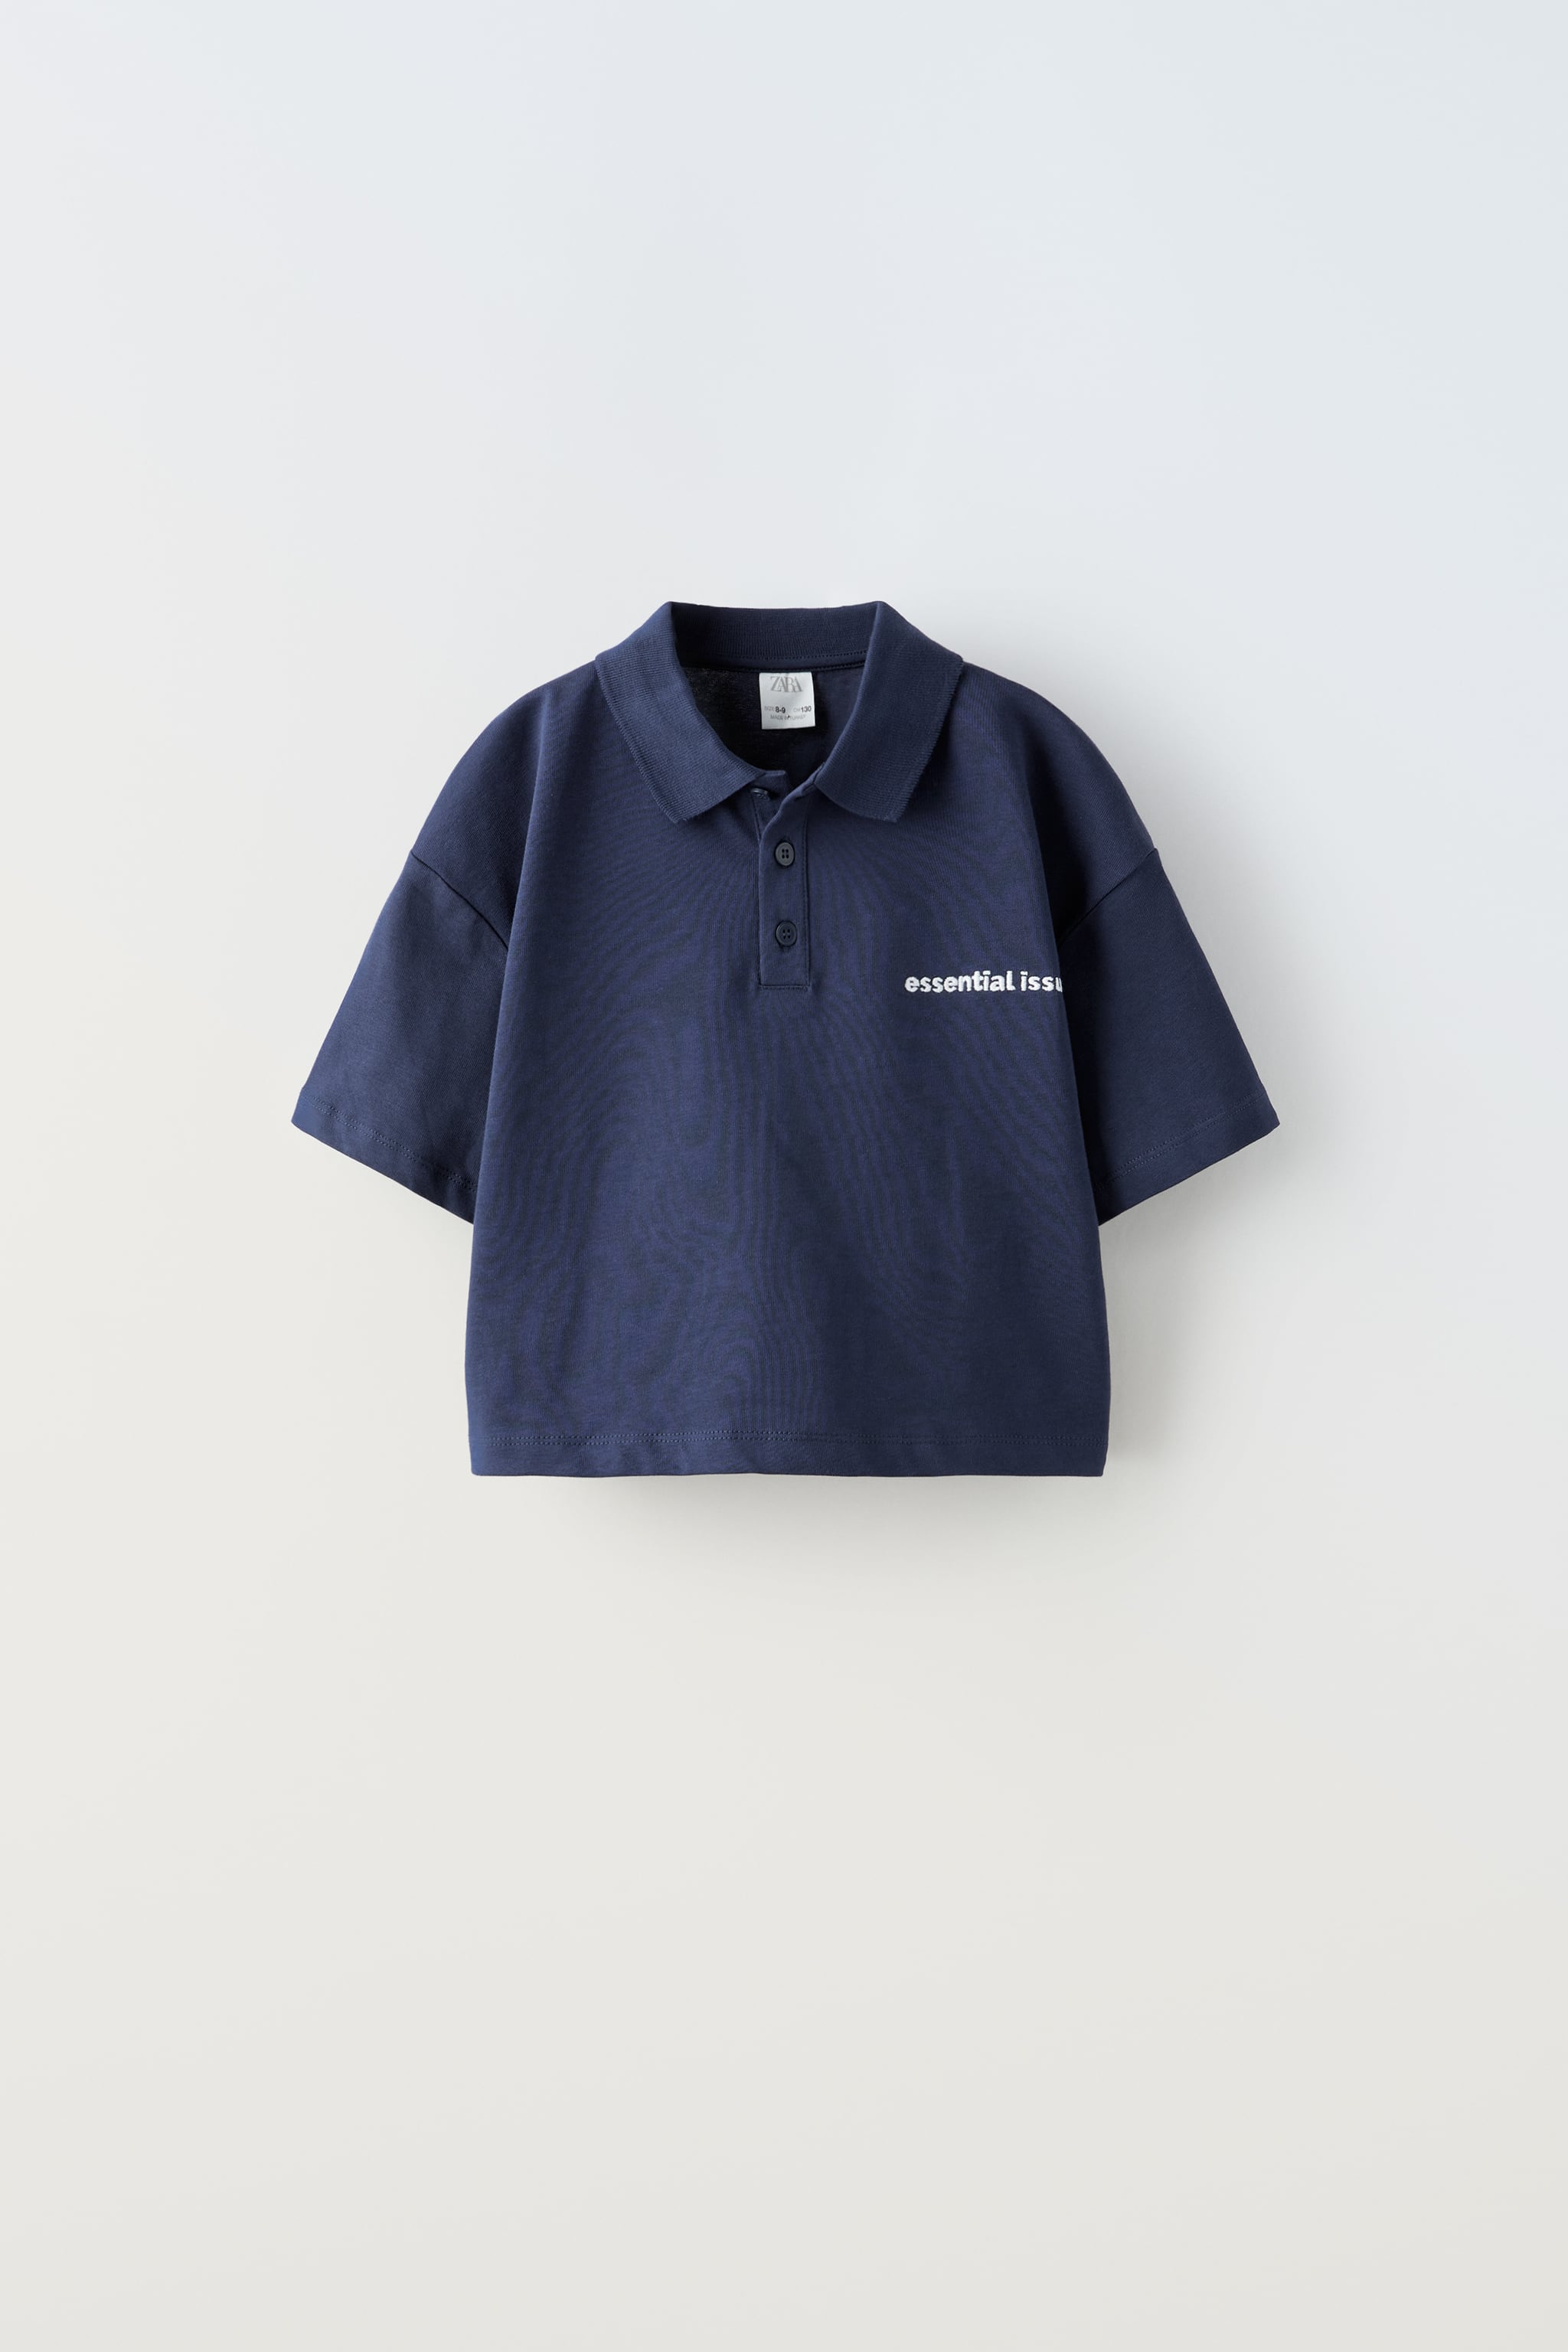 EMBROIDERED TEXT POLO SHIRT